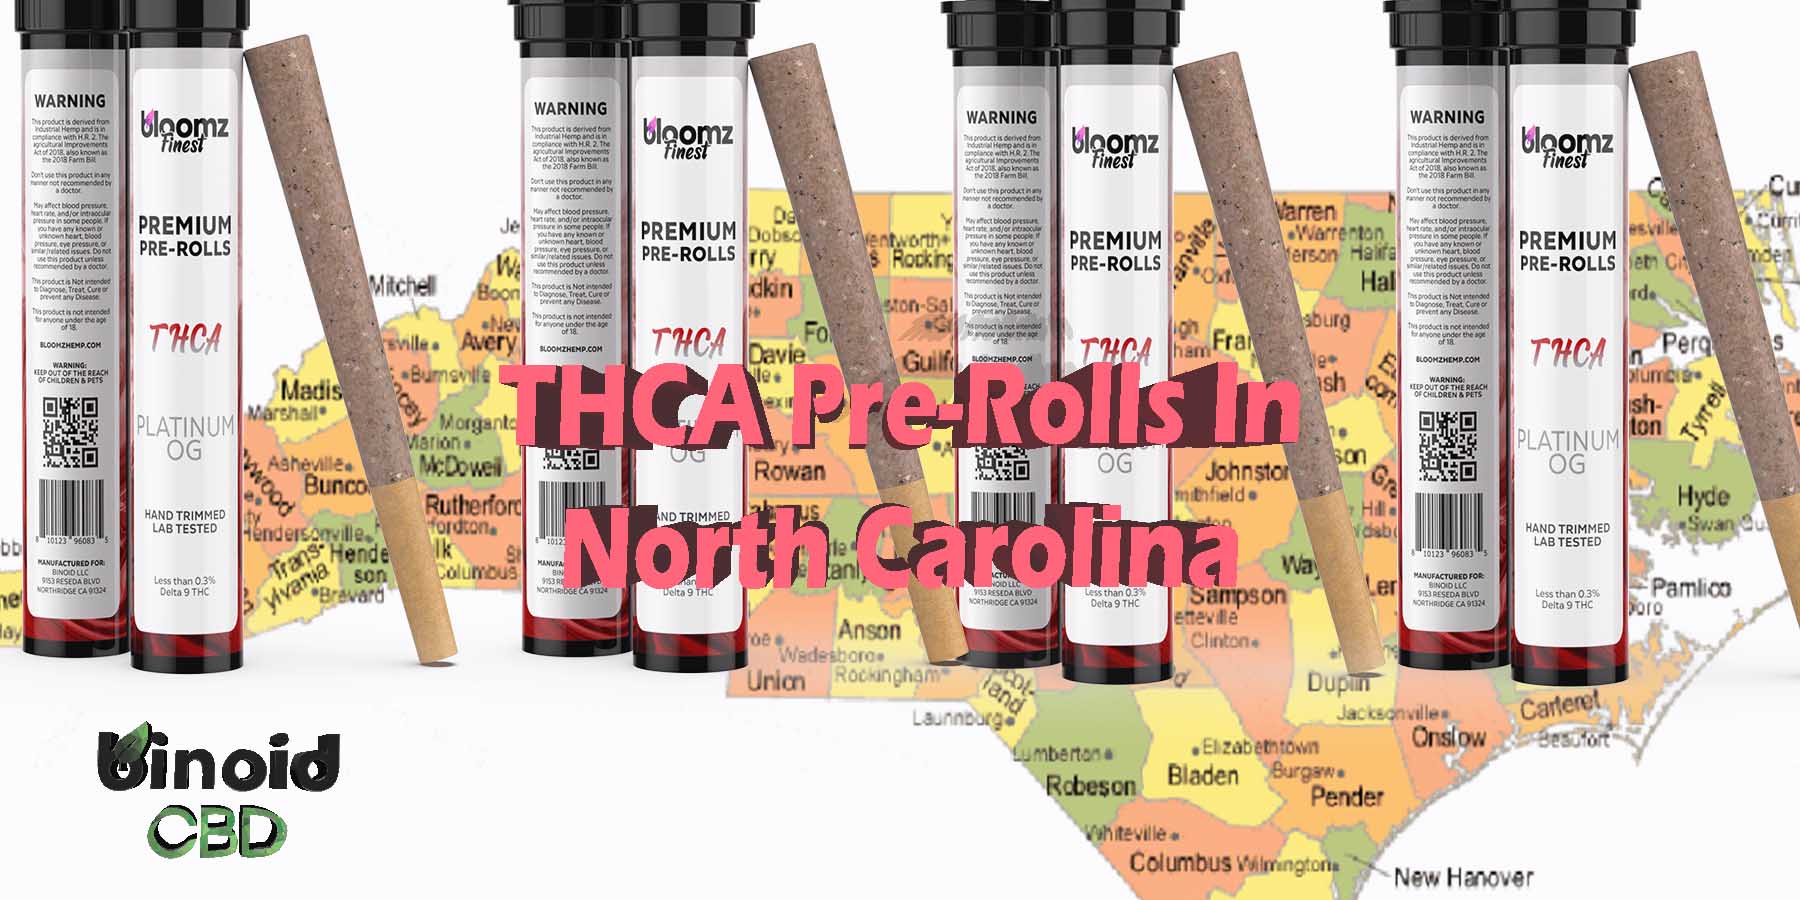 THCA Pre-Rolls In North Carolina THCA Hemp Flower Indica Where To Get Near Me Best Place Lowest Price Coupon Discount Strongest Brand Bloomz